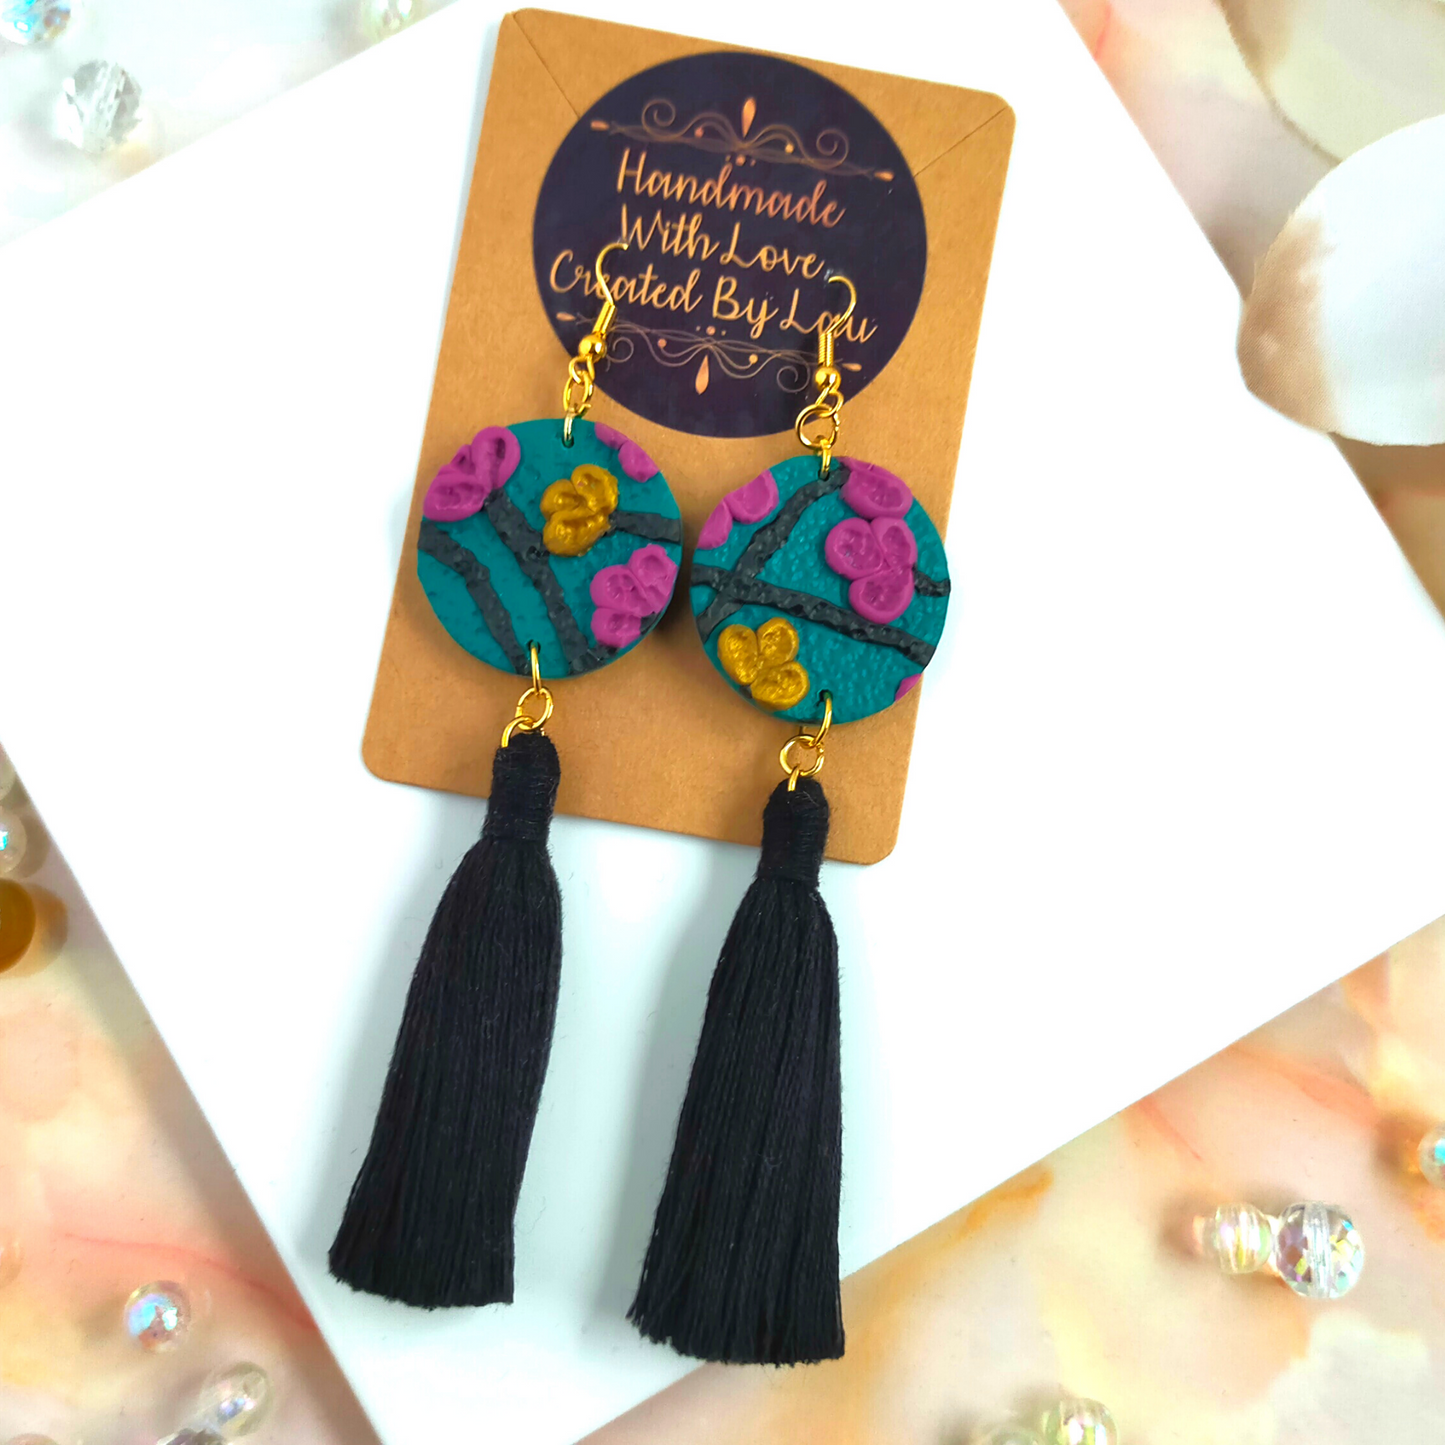 "Scarlett" Gold Plated Green Flora Polymer Clay Earrings with Tassel